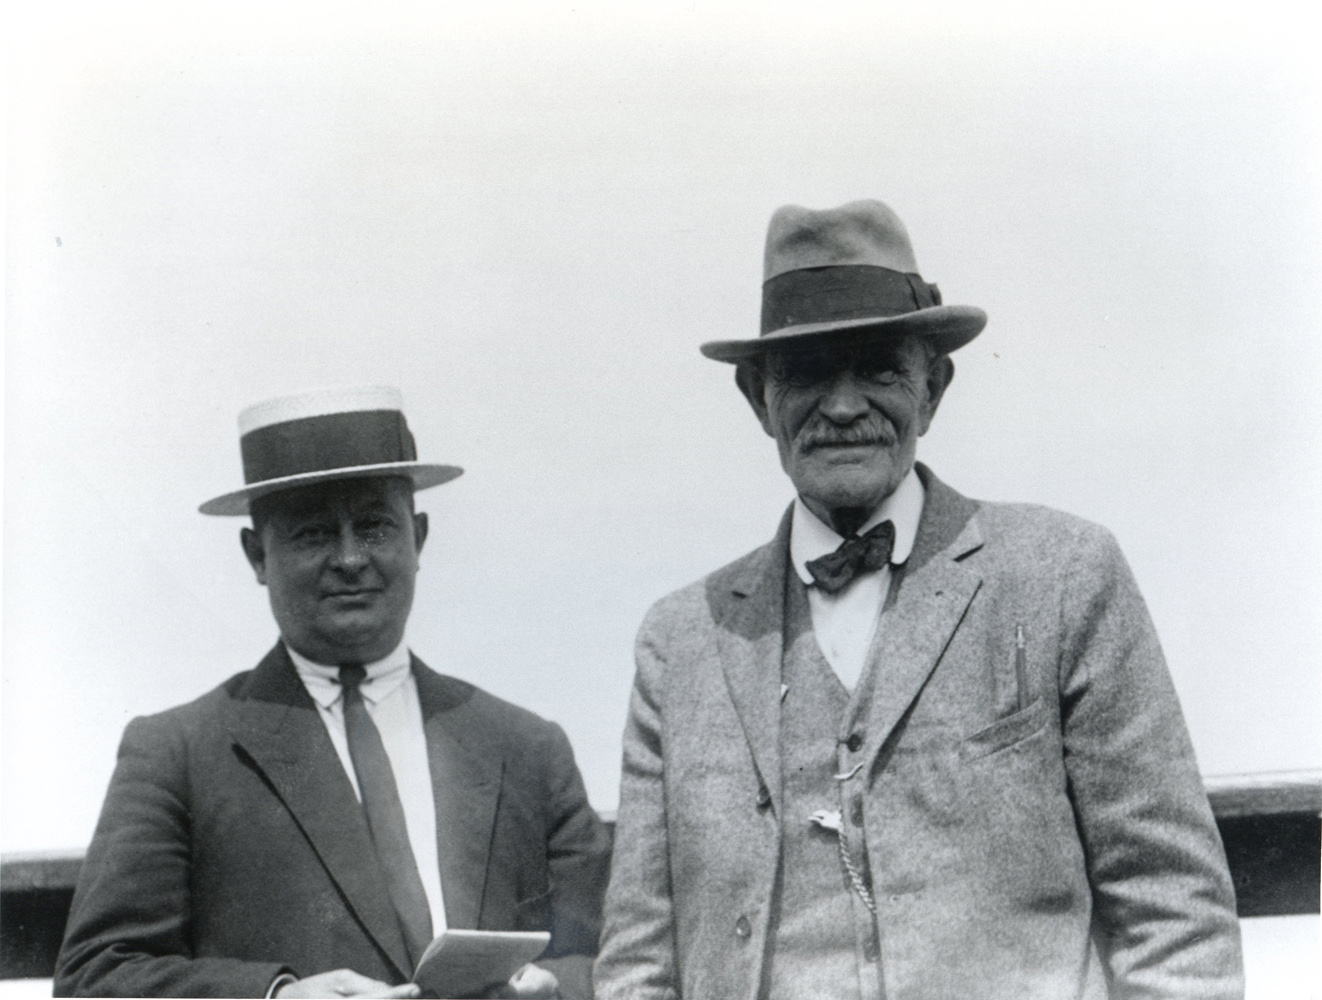 Winfield O'Connor and an unidentified man (Keeneland Library Cook Collection)